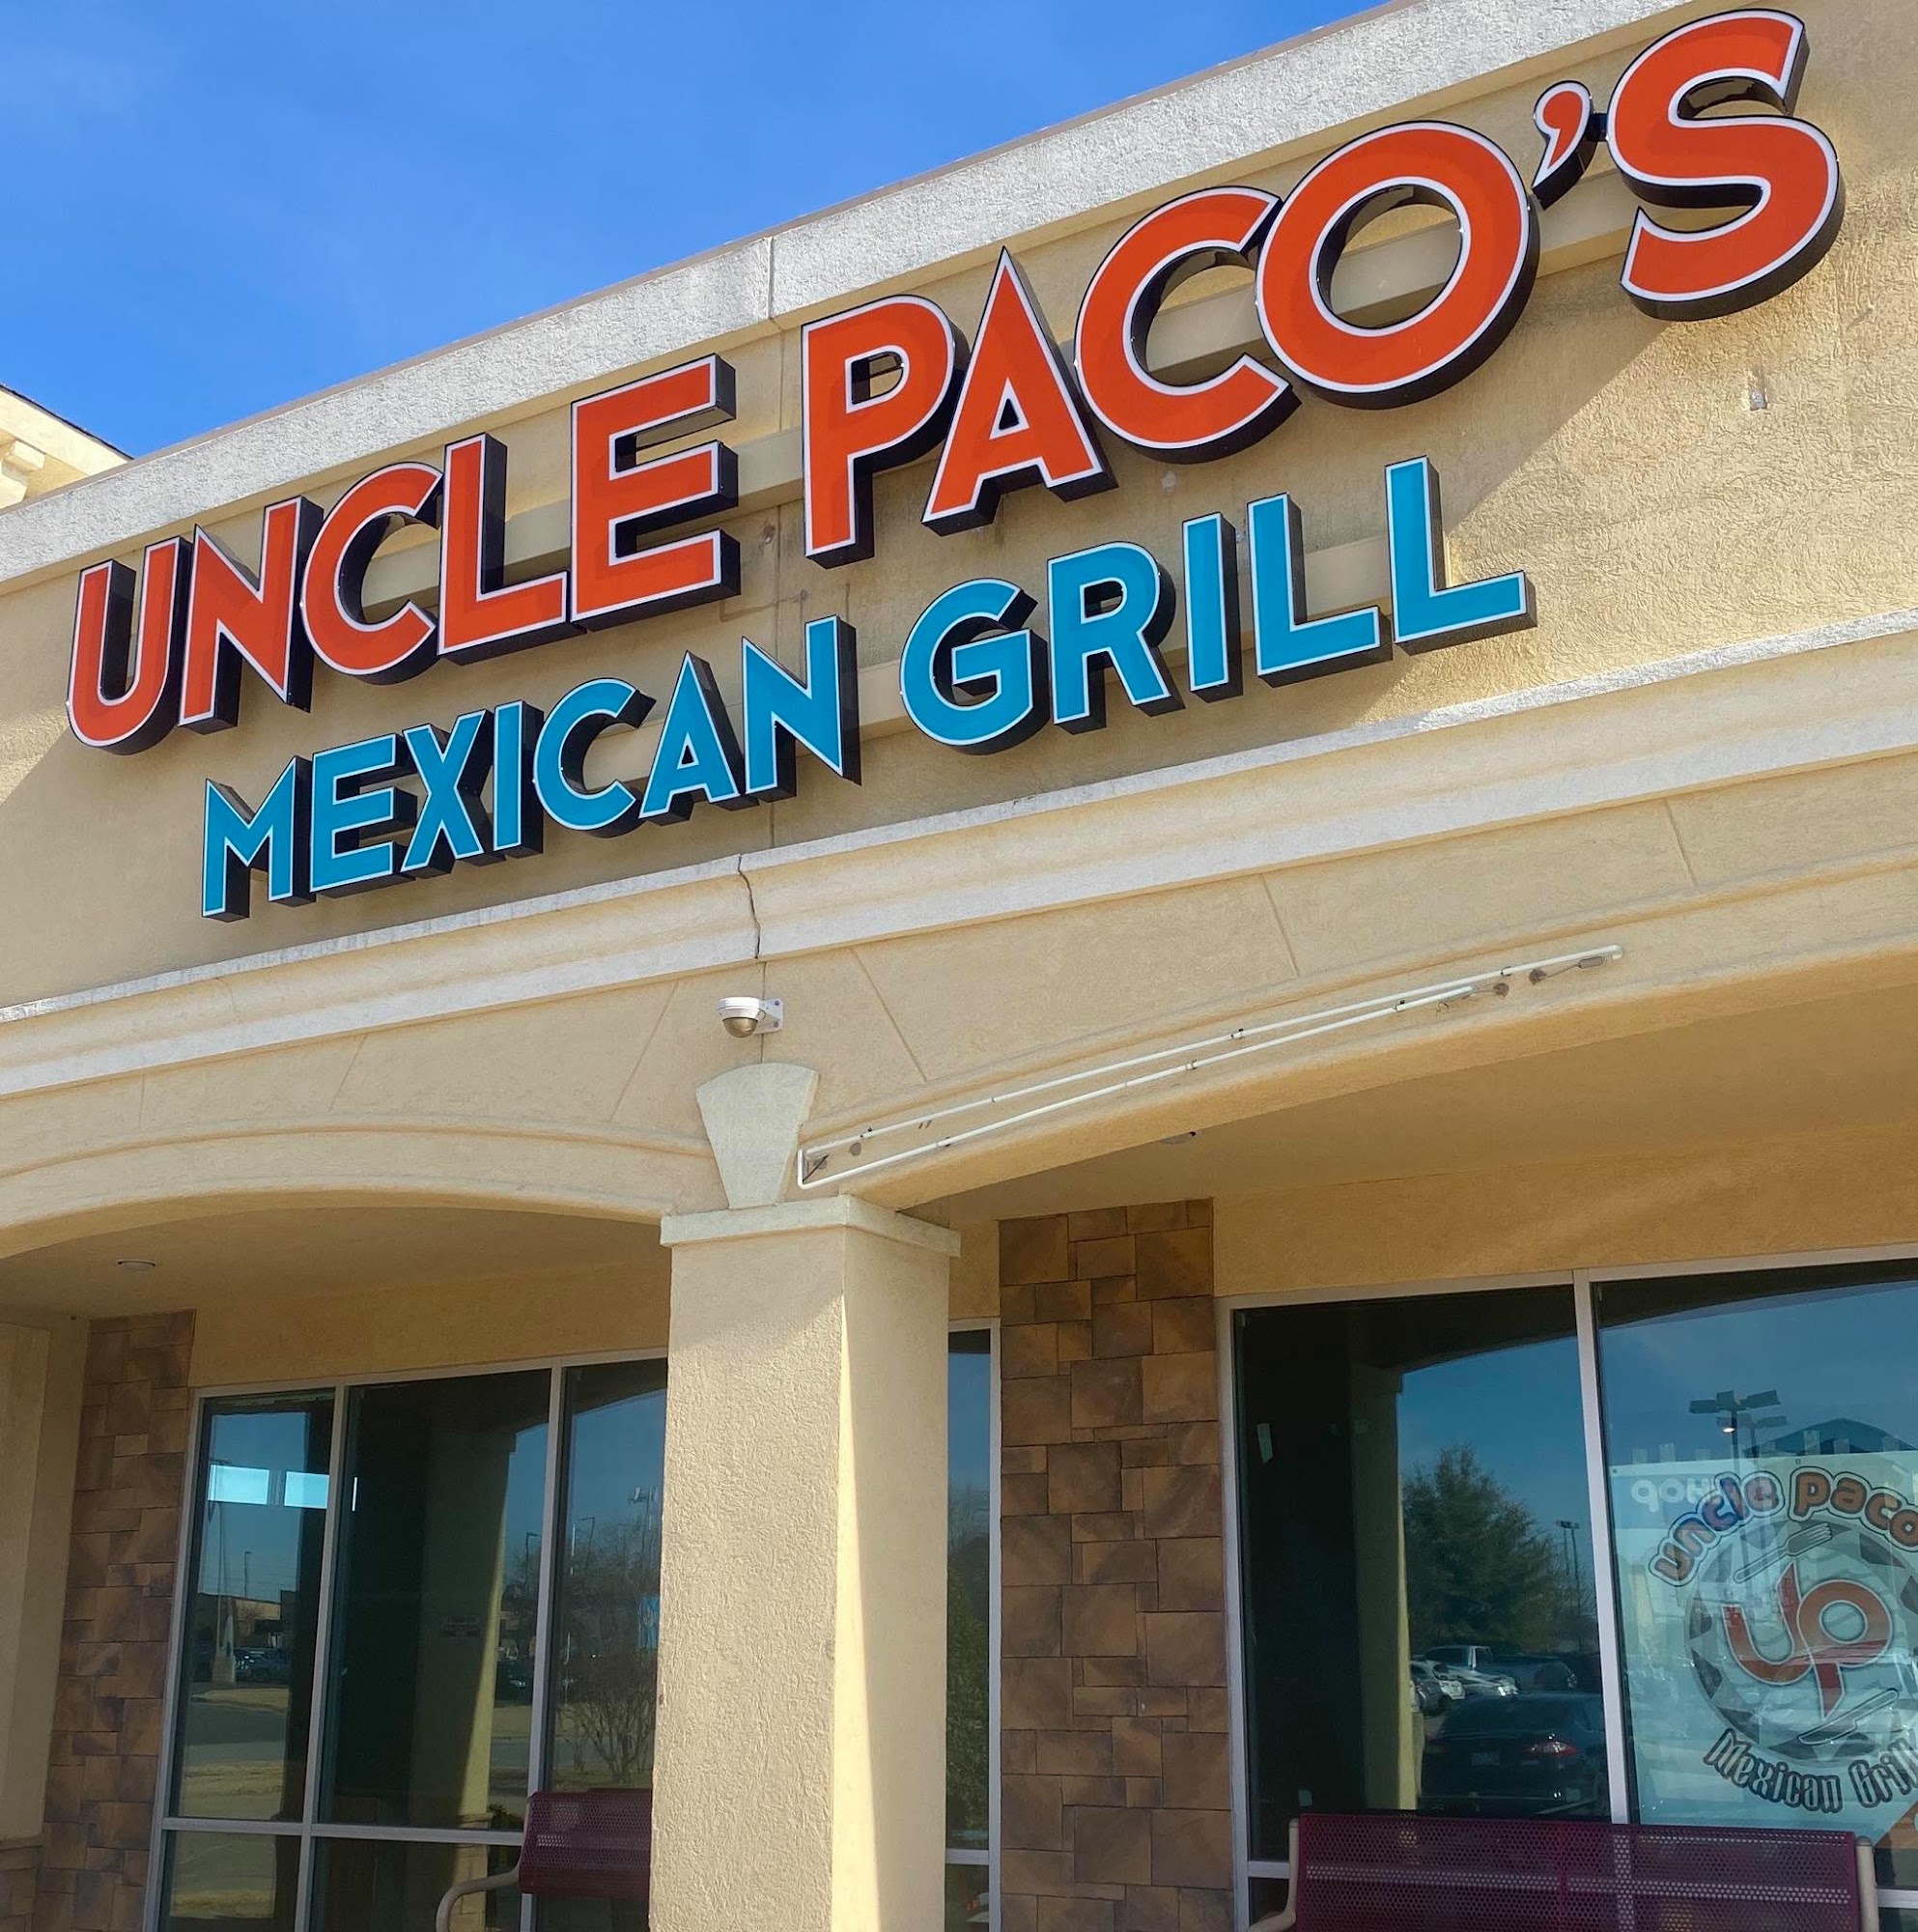 Uncle Paco's Mexican Grill